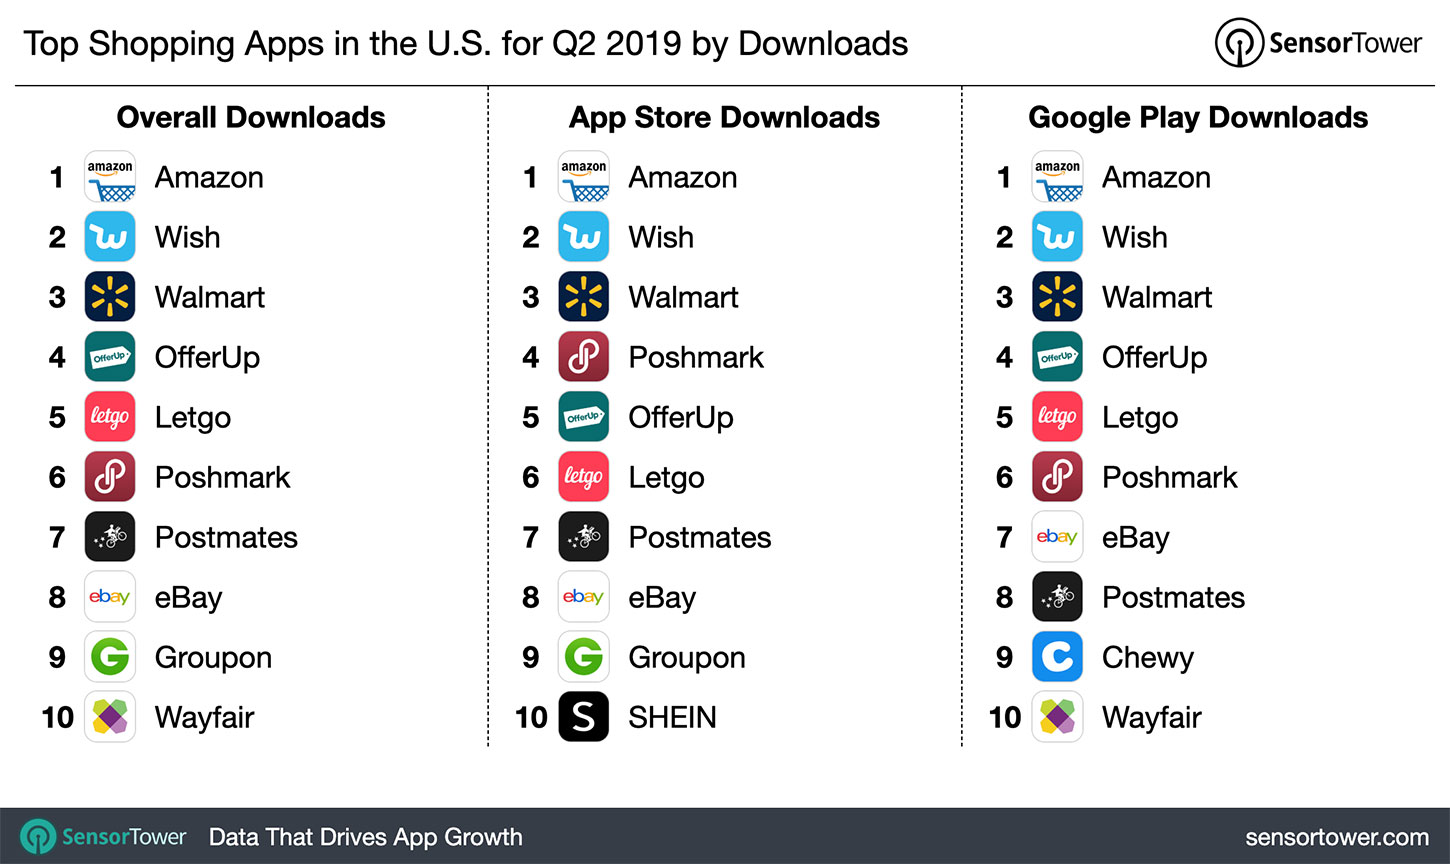 Top Shopping Apps in the U.S. for Q2 2019 by Downloads